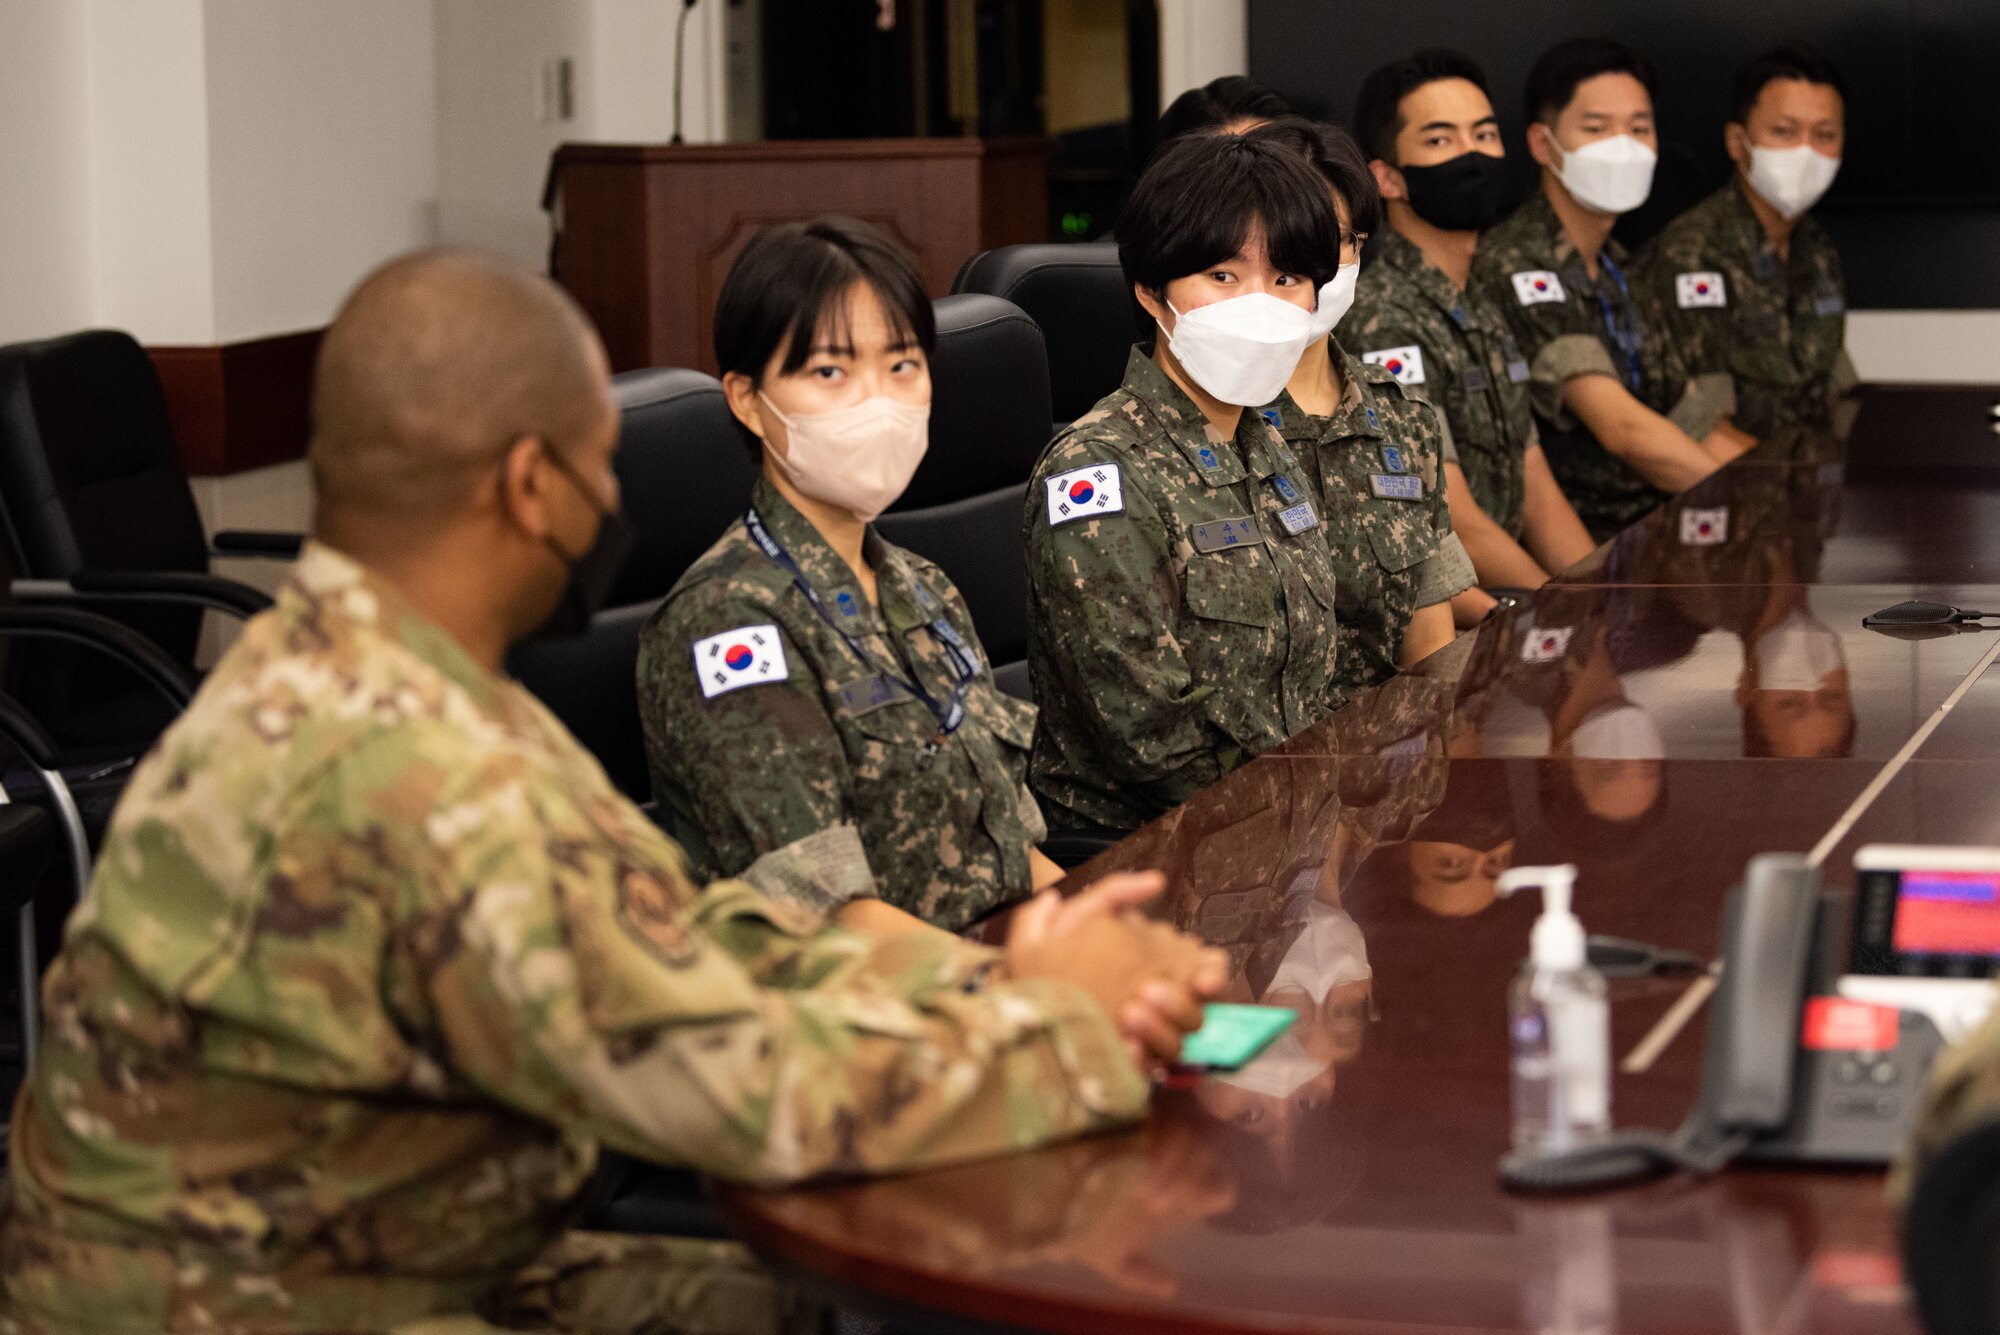 U.S. Air Force Lt. Col. Romaine Russell, 7th Air Force joint plans director, meets with Republic of Korea Air Force translator officers before an immersion tour at Osan Air Base, Republic of Korea, Aug. 2, 2022.